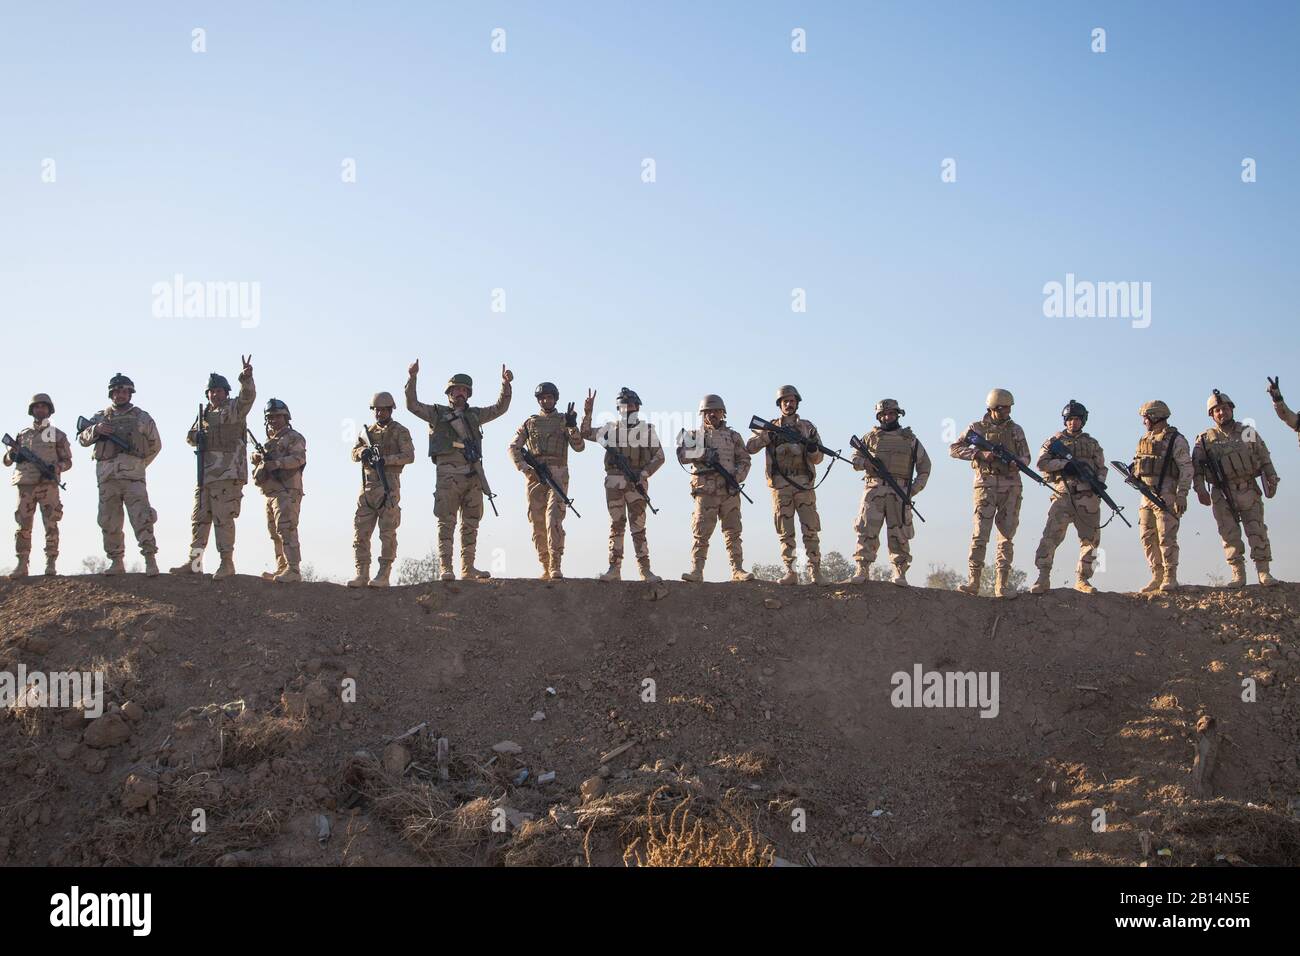 Iraqi security forces soldiers pause for a photo during react to enemy contact training at Camp Taji, Iraq, Feb. 25, 2017. The soldiers attended a Junior Leaders Course led by Coalition forces designed to enhance basic combat skills in support of Combined Joint Task Force – Operation Inherent Resolve, the global Coalition to defeat ISIS in Iraq and Syria.  (U.S. Army photo by Spc. Christopher Brecht) Stock Photo